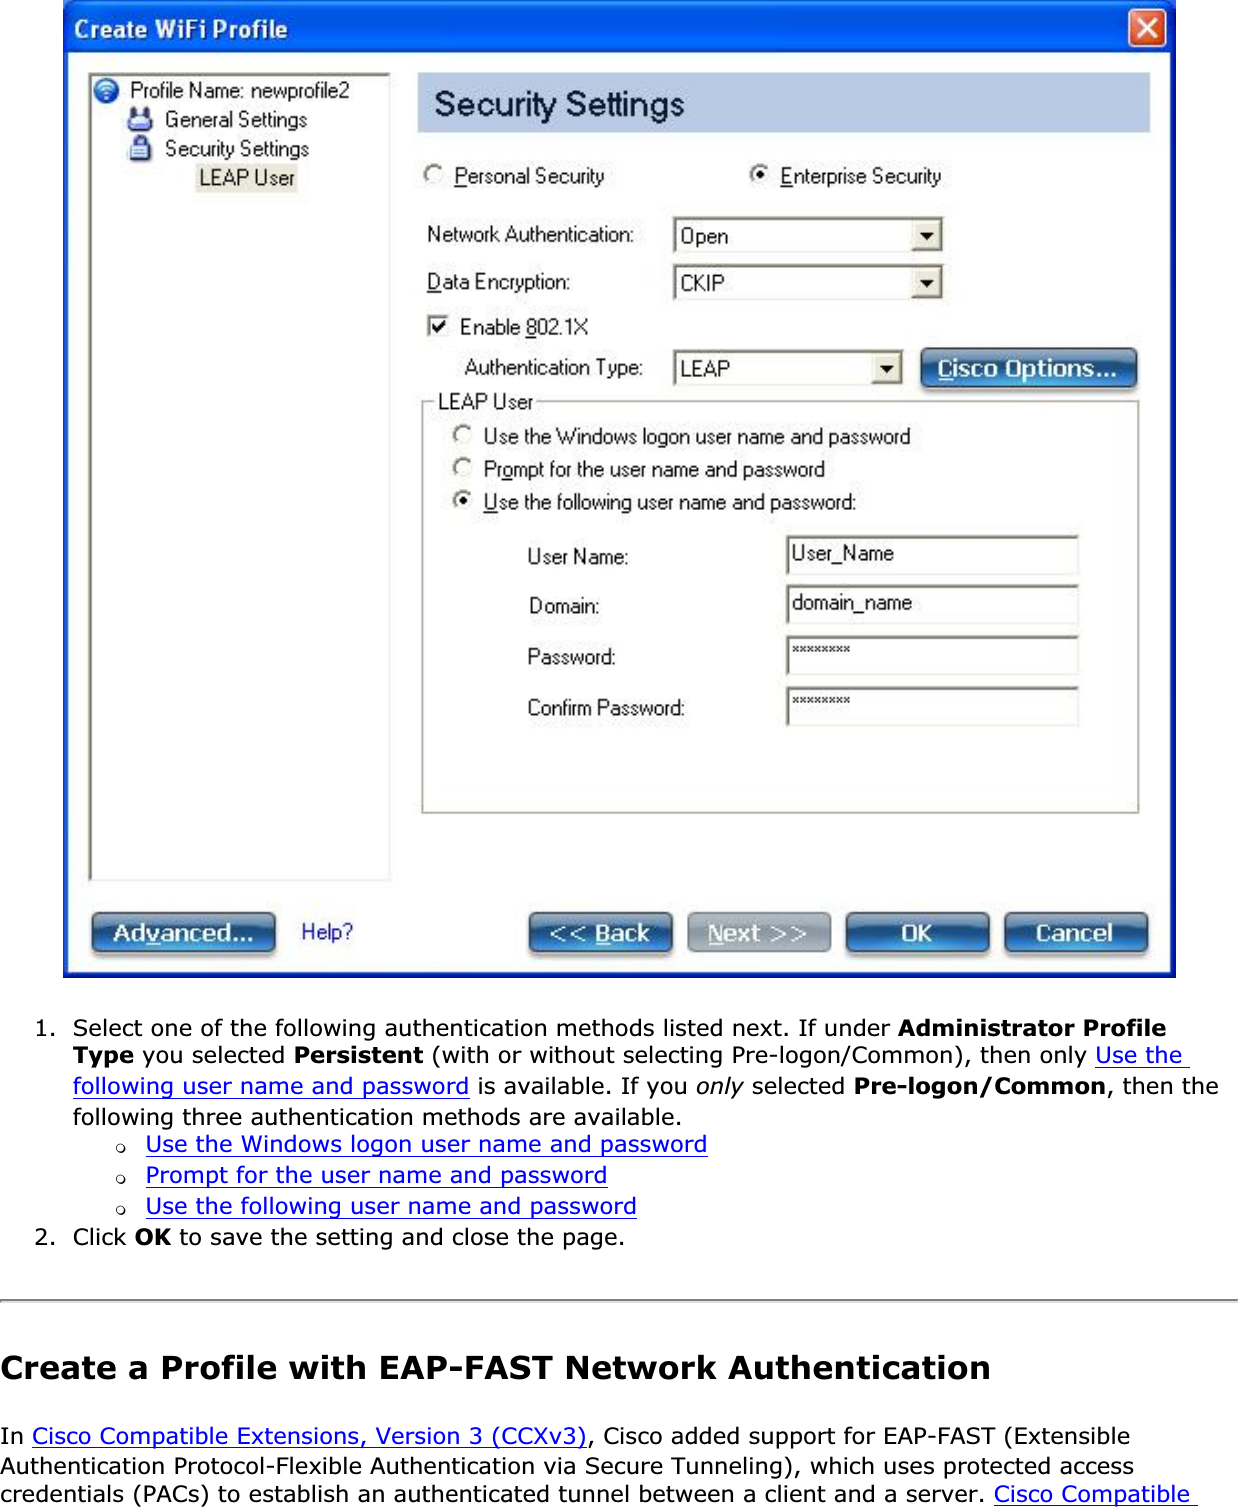 1. Select one of the following authentication methods listed next. If under Administrator Profile Type you selected Persistent (with or without selecting Pre-logon/Common), then only Use the following user name and password is available. If you only selected Pre-logon/Common, then the following three authentication methods are available.❍Use the Windows logon user name and password❍Prompt for the user name and password❍Use the following user name and password2. Click OK to save the setting and close the page.Create a Profile with EAP-FAST Network Authentication In Cisco Compatible Extensions, Version 3 (CCXv3), Cisco added support for EAP-FAST (Extensible Authentication Protocol-Flexible Authentication via Secure Tunneling), which uses protected access credentials (PACs) to establish an authenticated tunnel between a client and a server. Cisco Compatible 